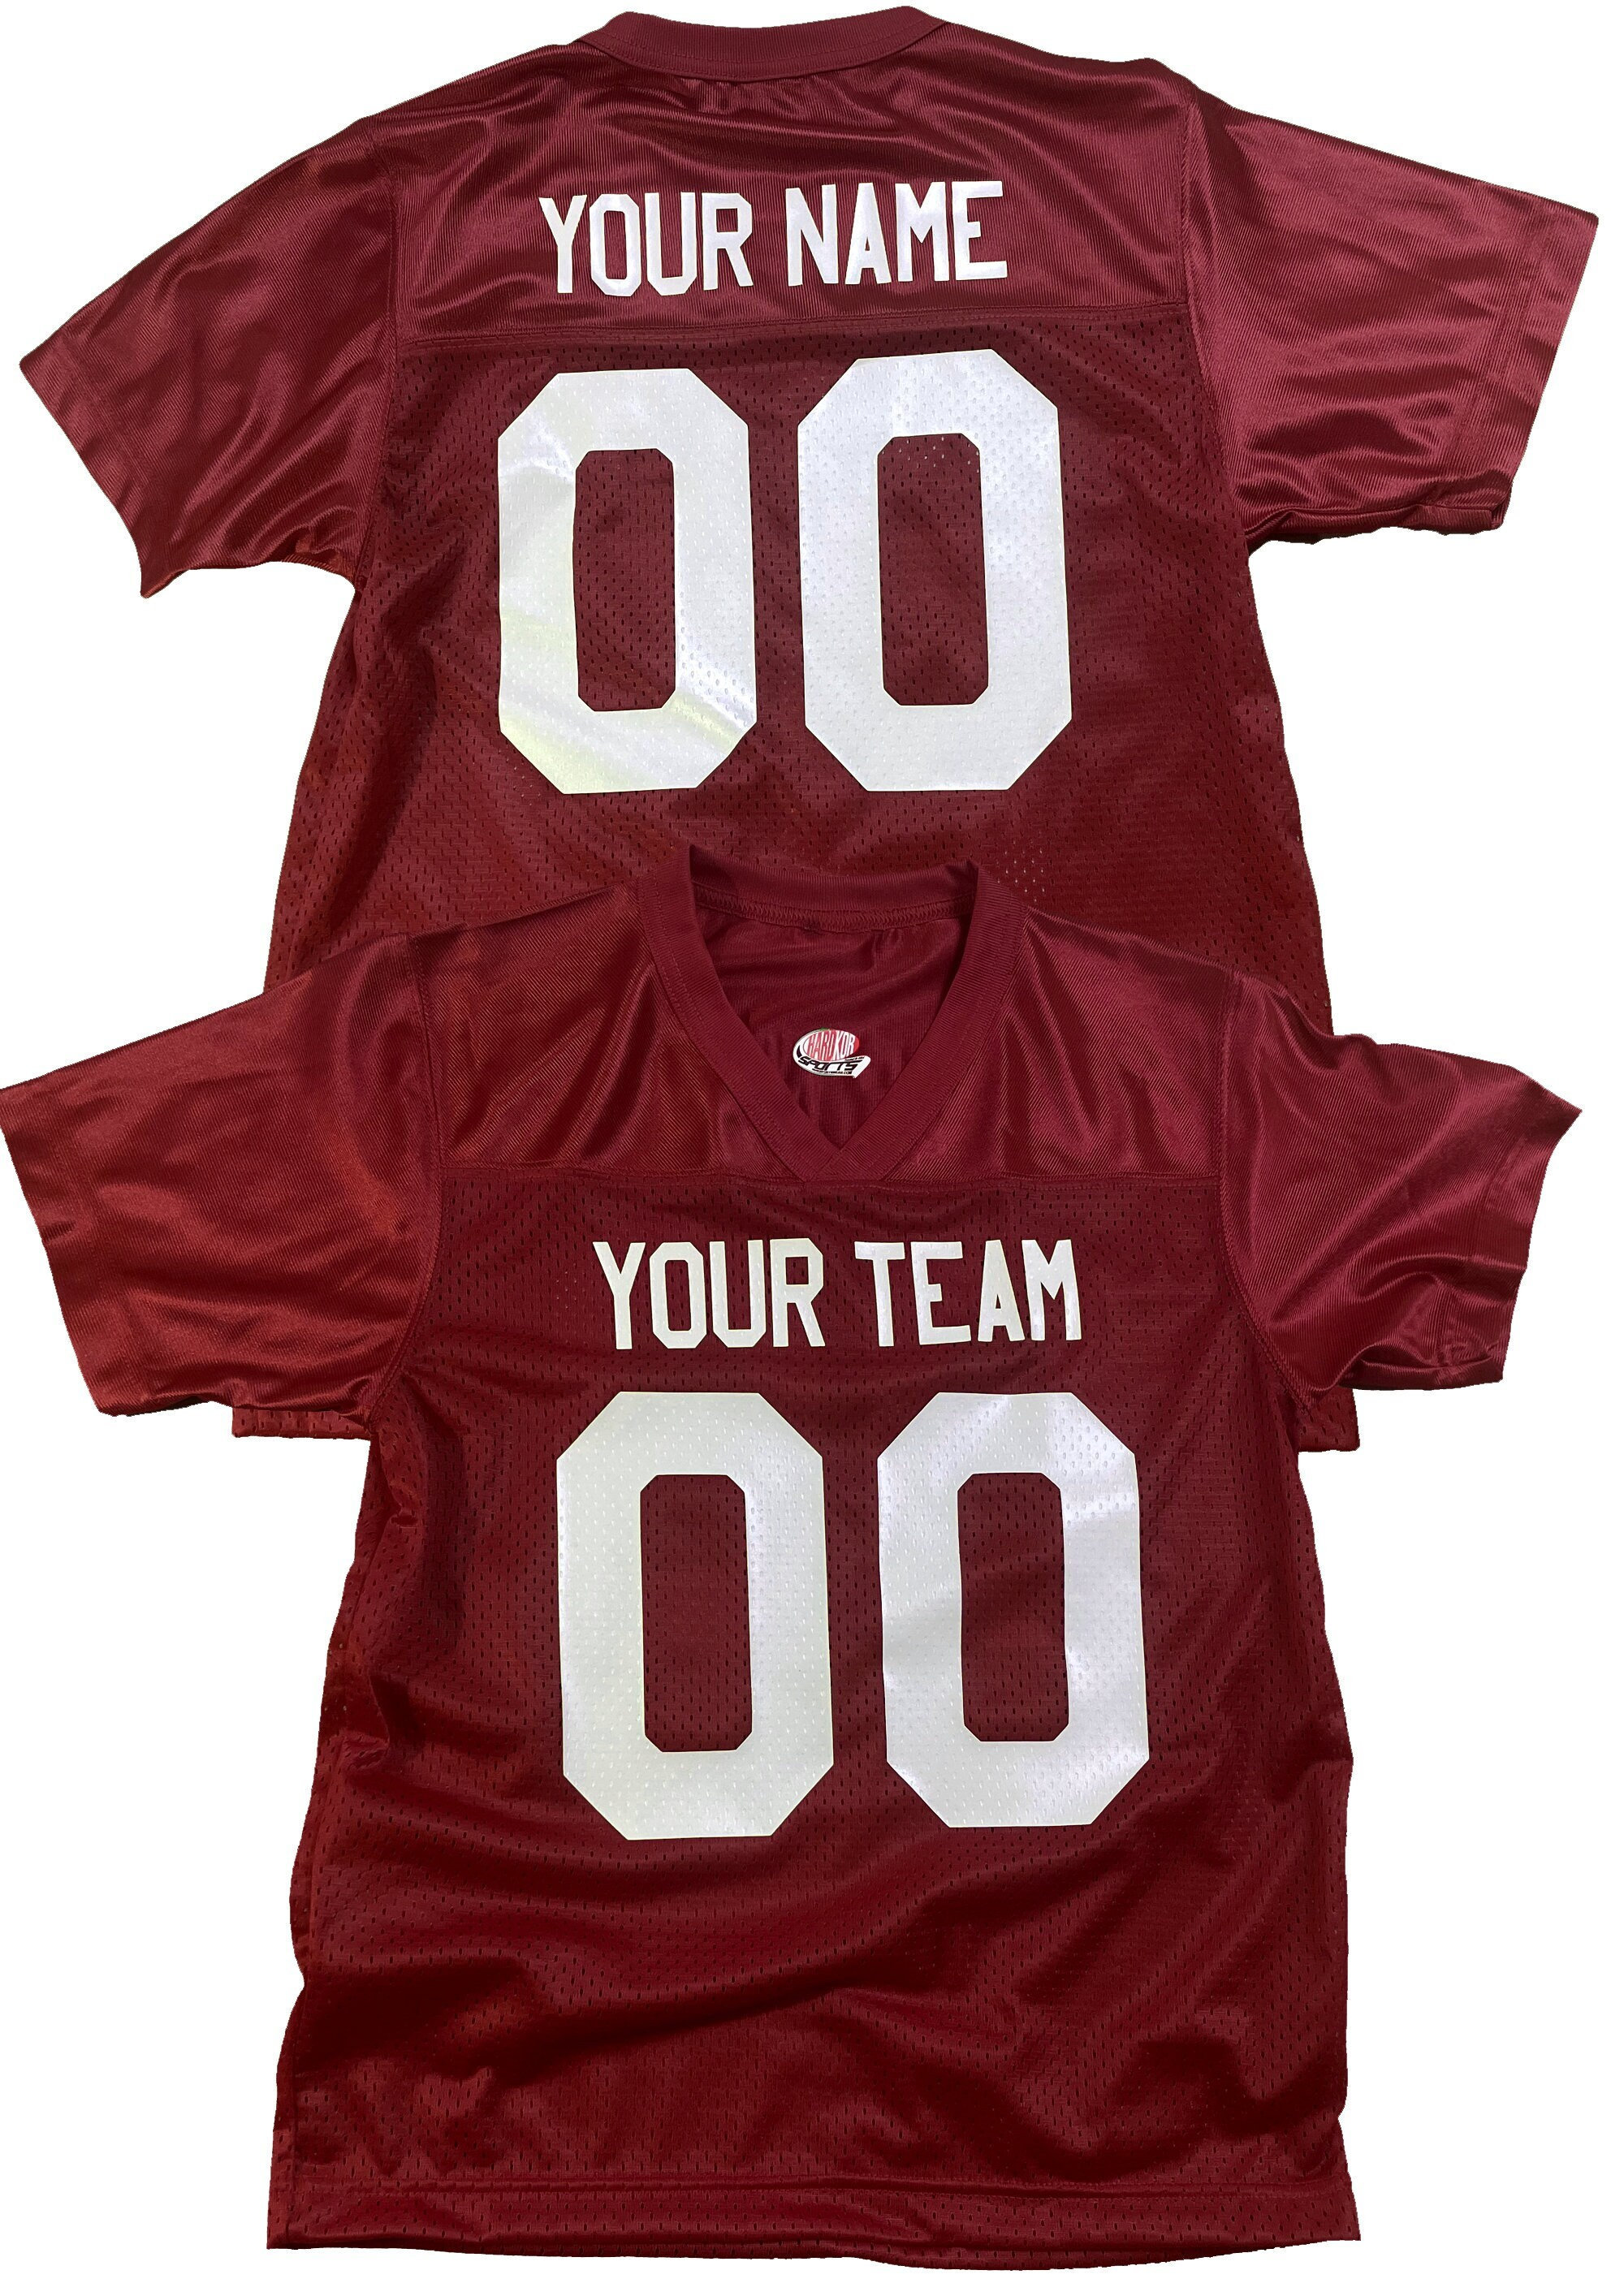  Red Football Jersey Blank Jersey Replica Athletic